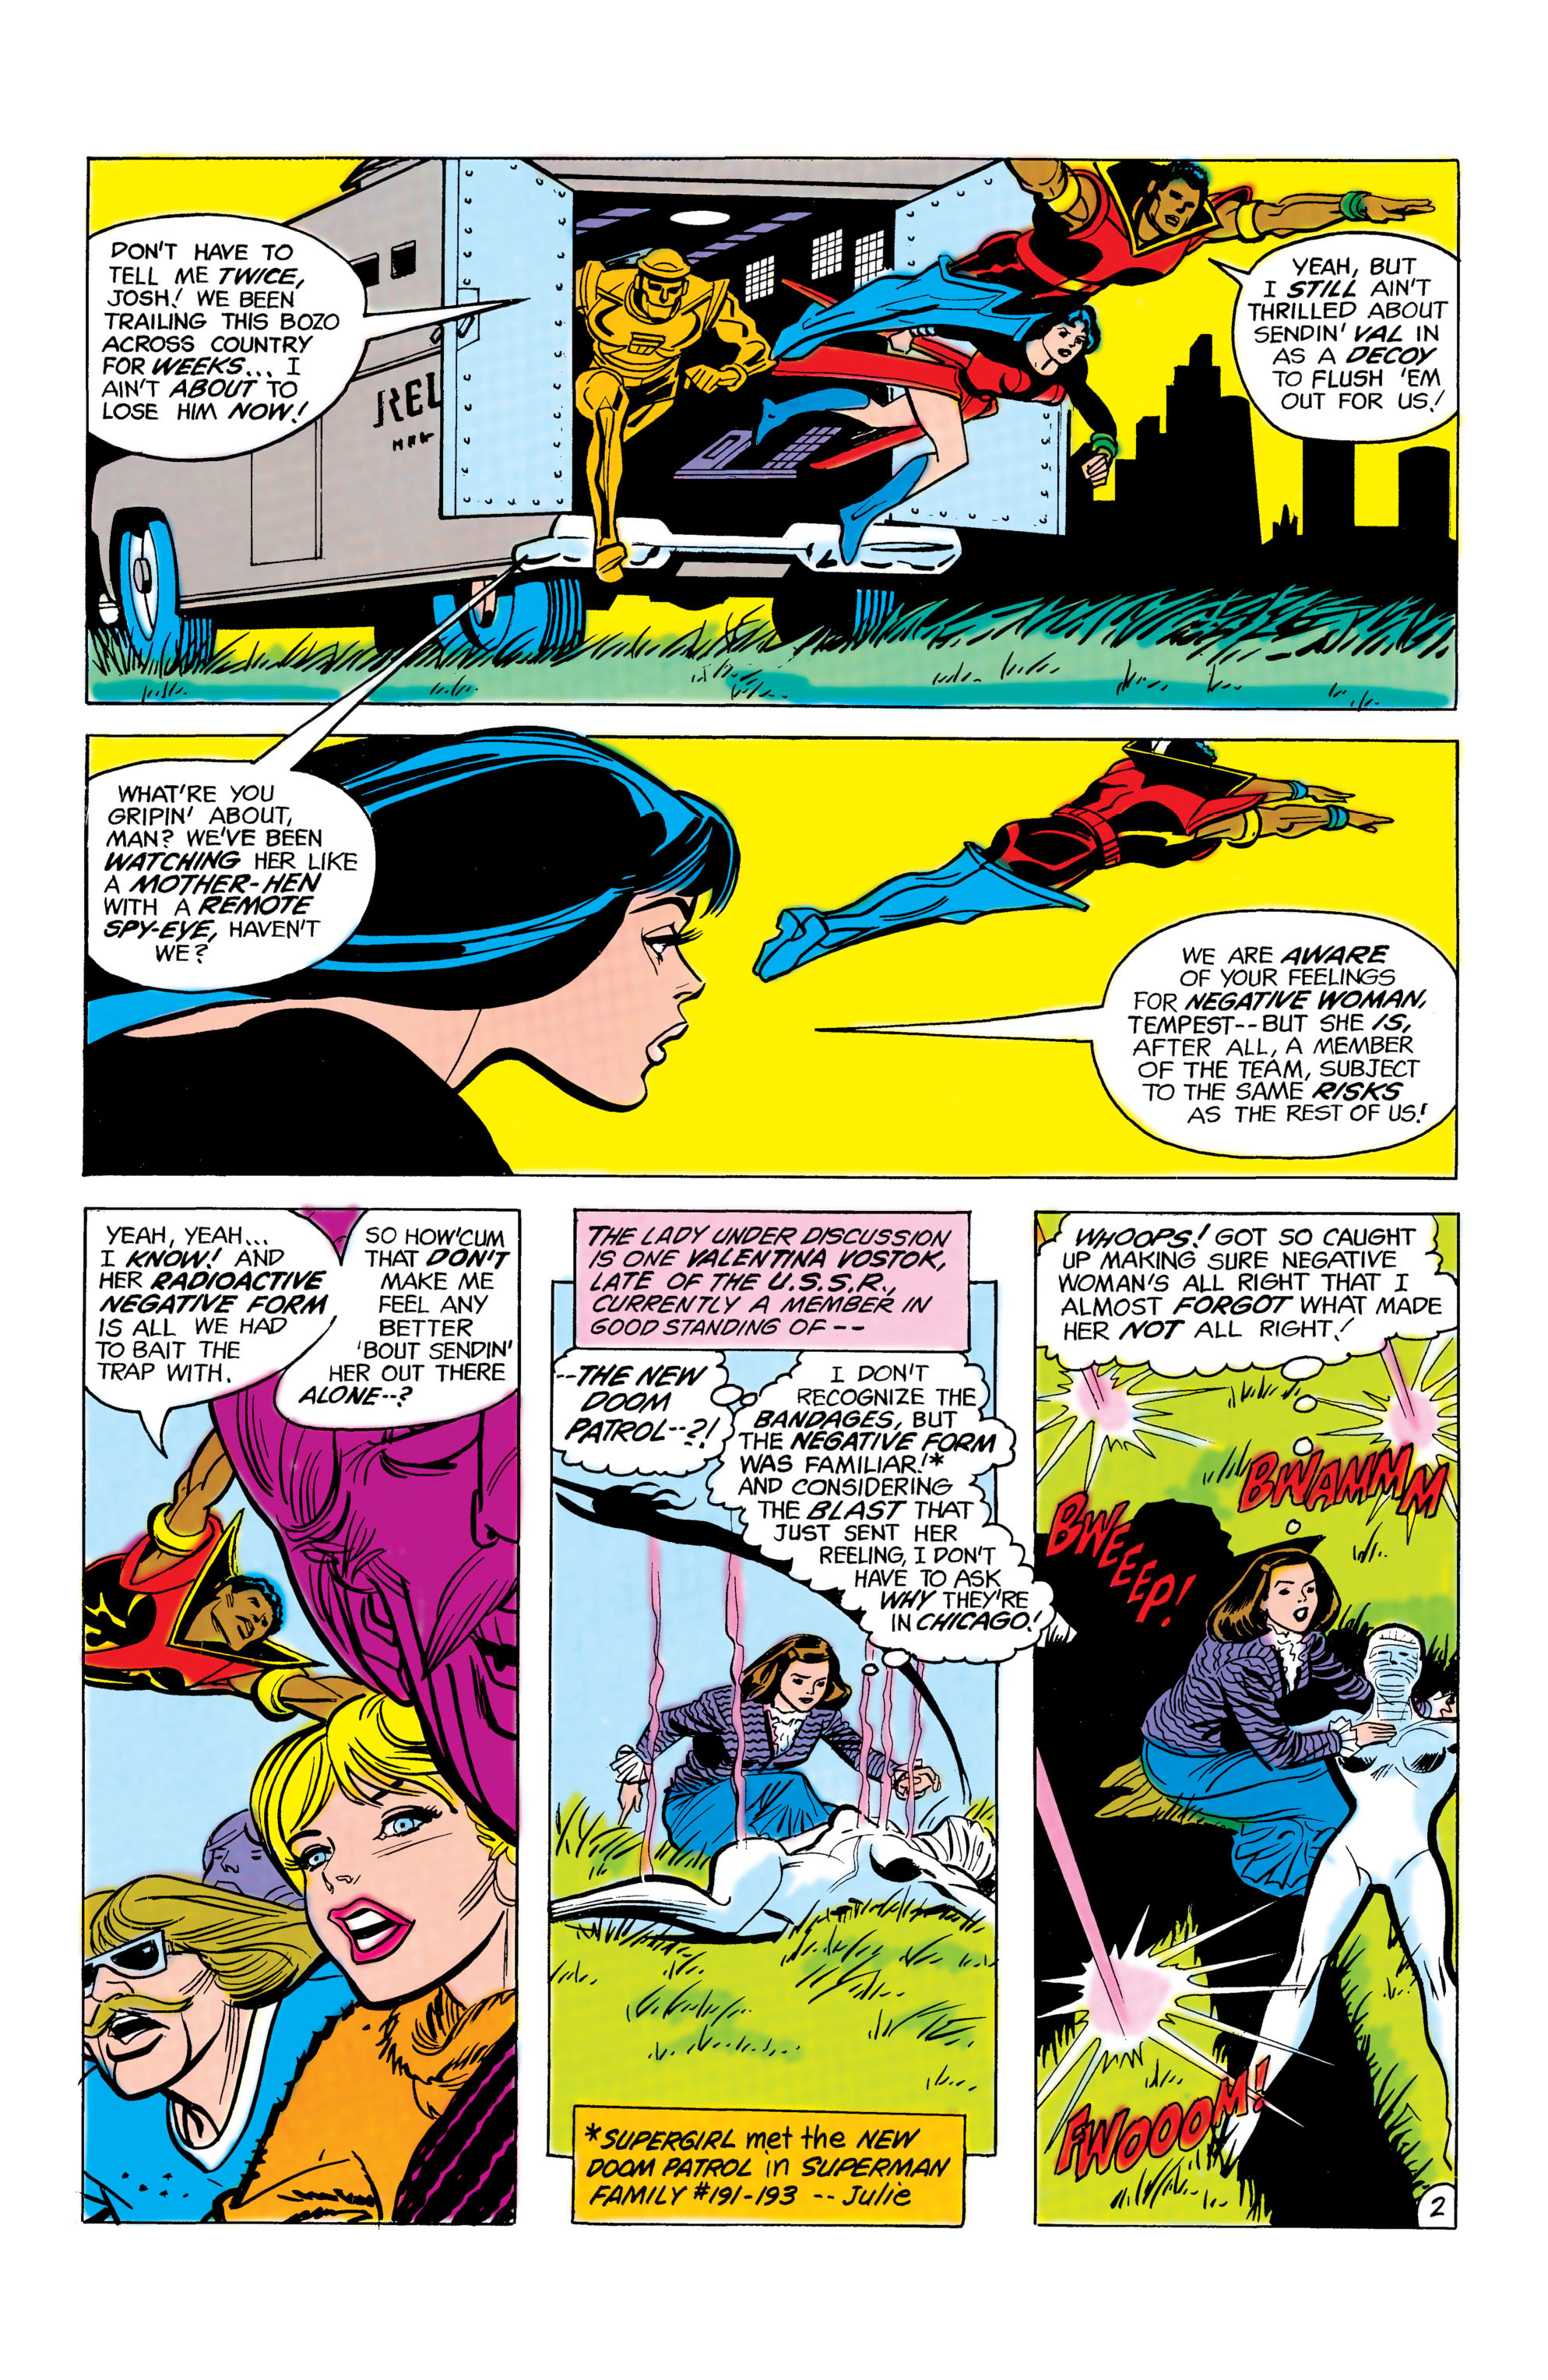 Supergirl (1982) 8 Page 2